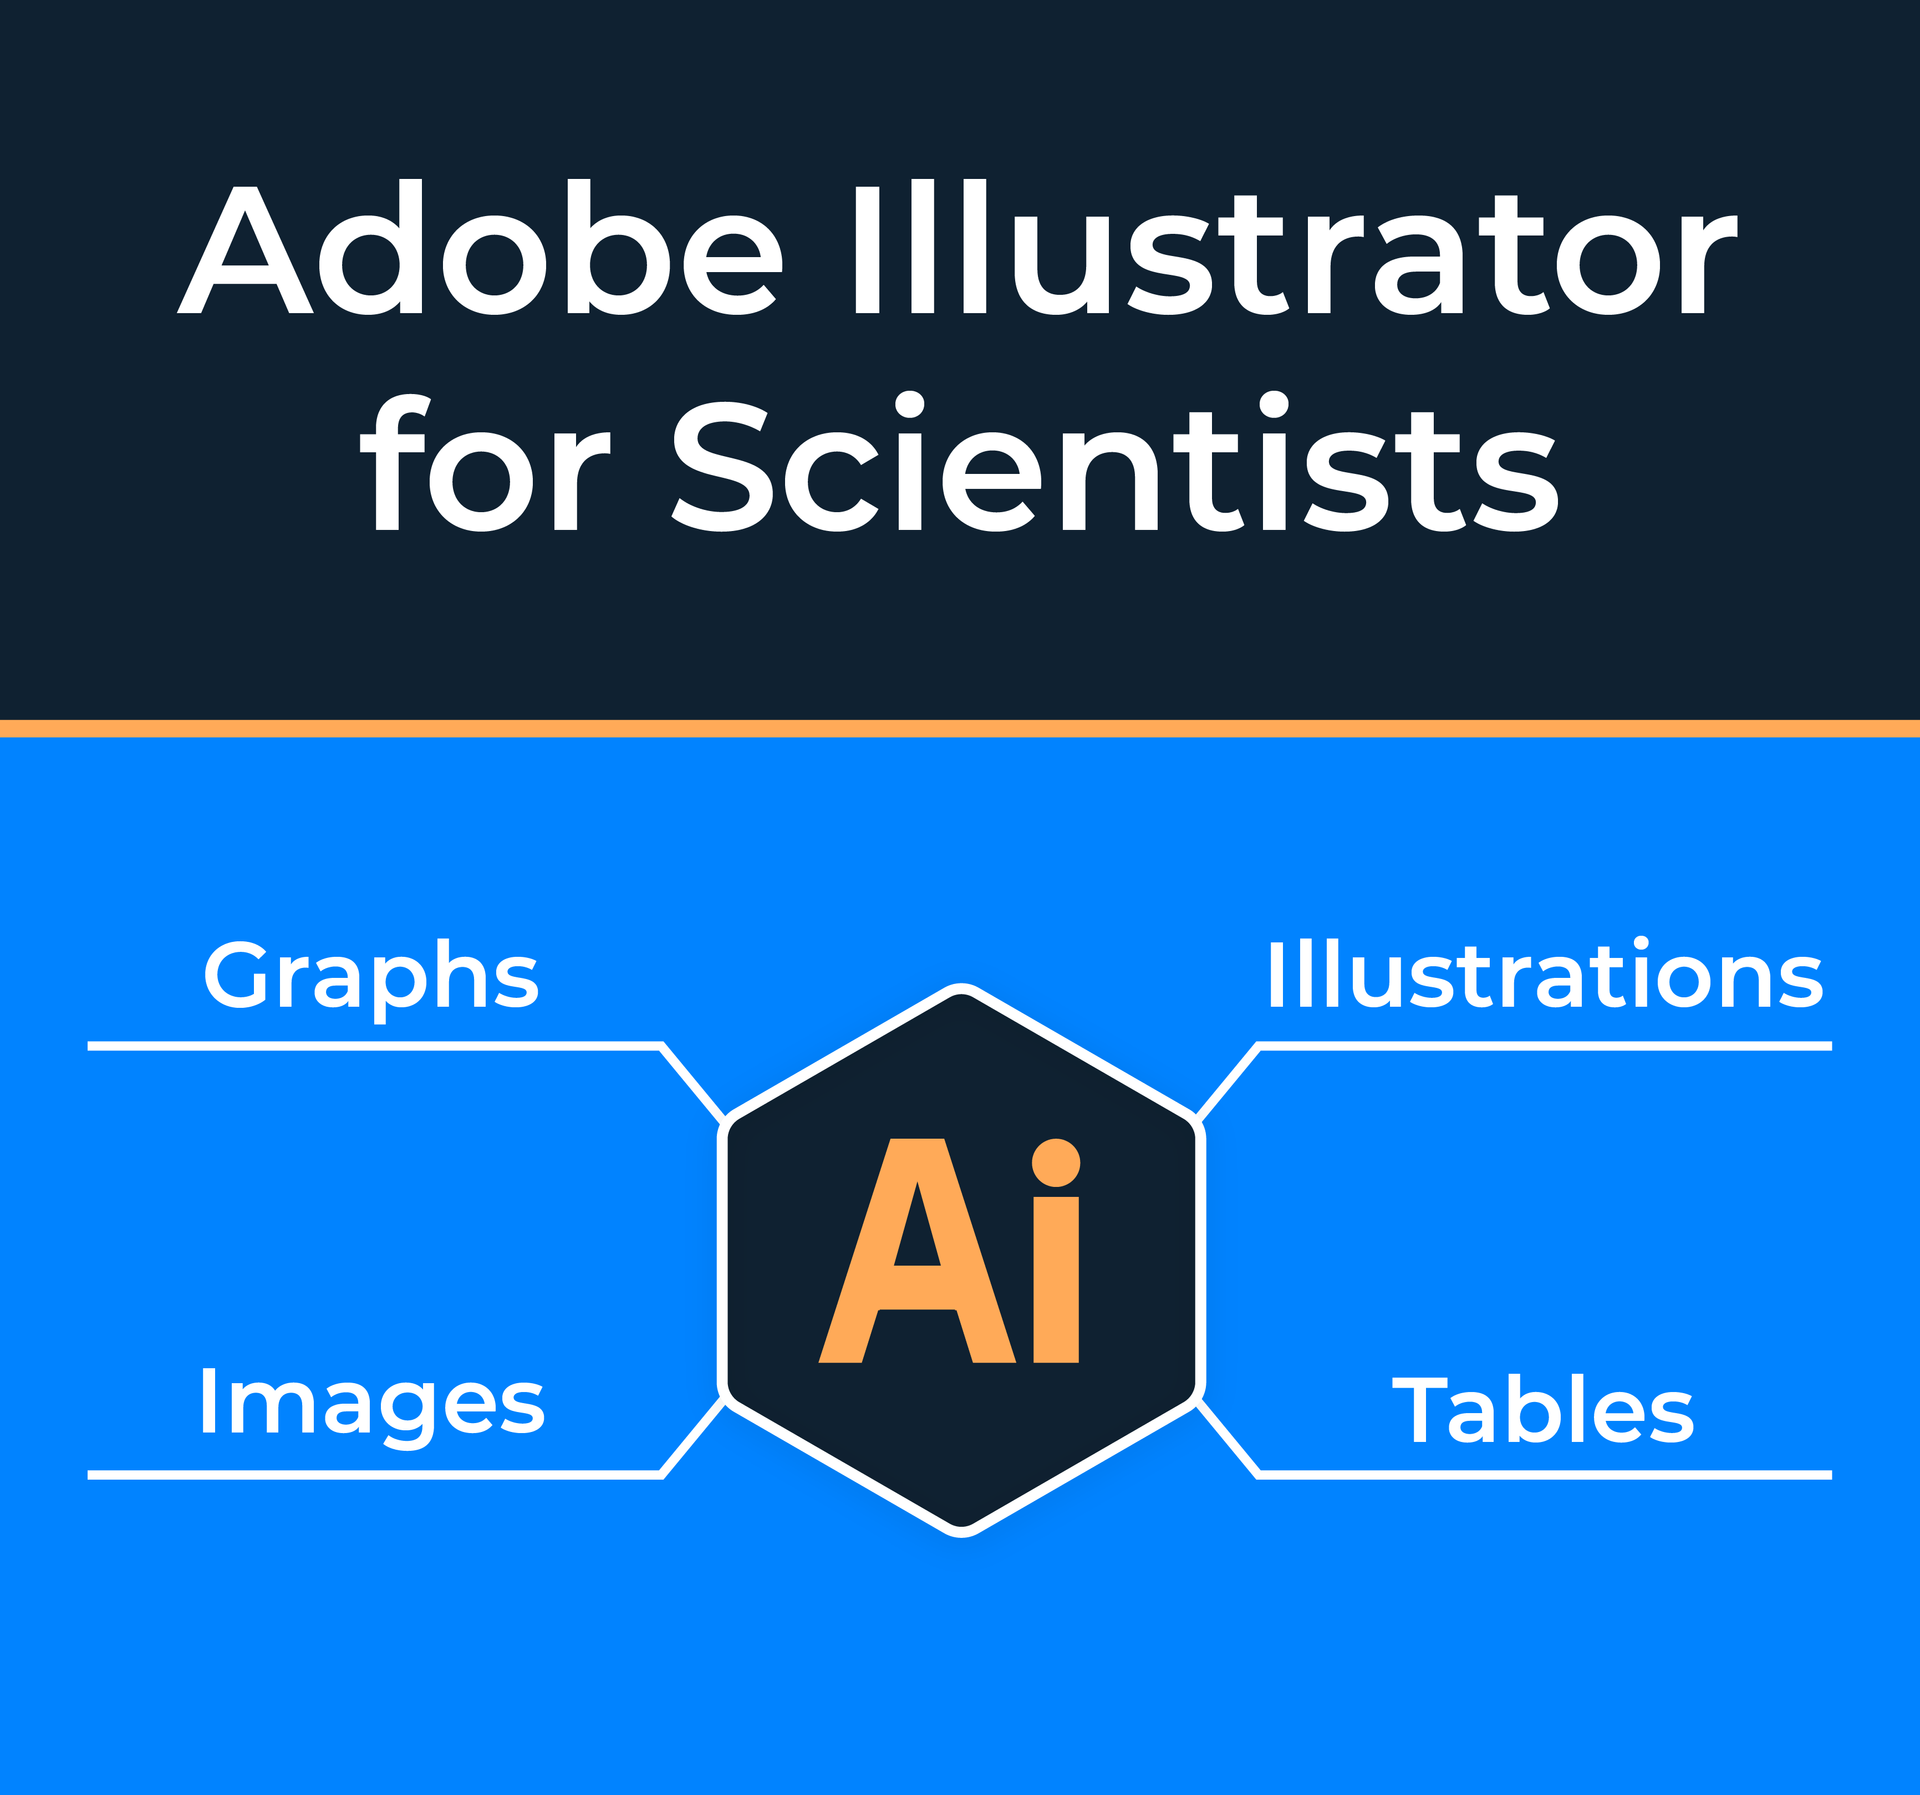 Adobe Illustrator course for scientists overview